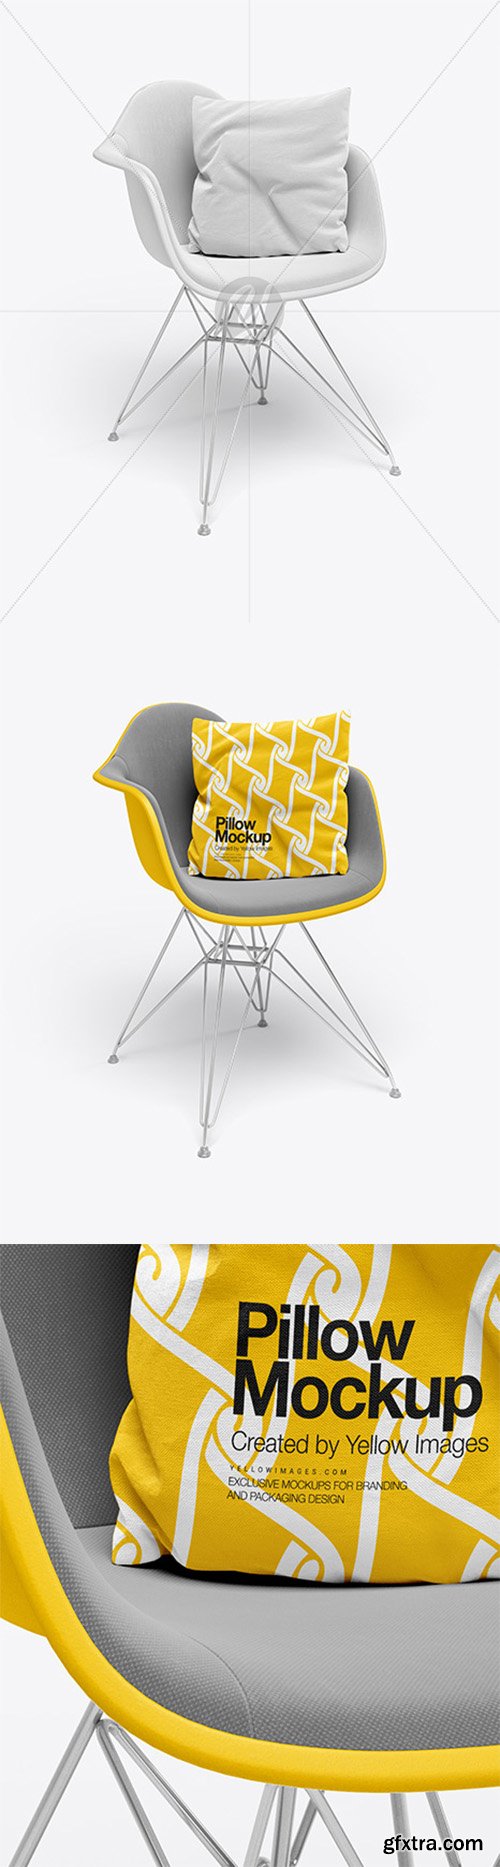 Chair With Pillow Mockup 35907